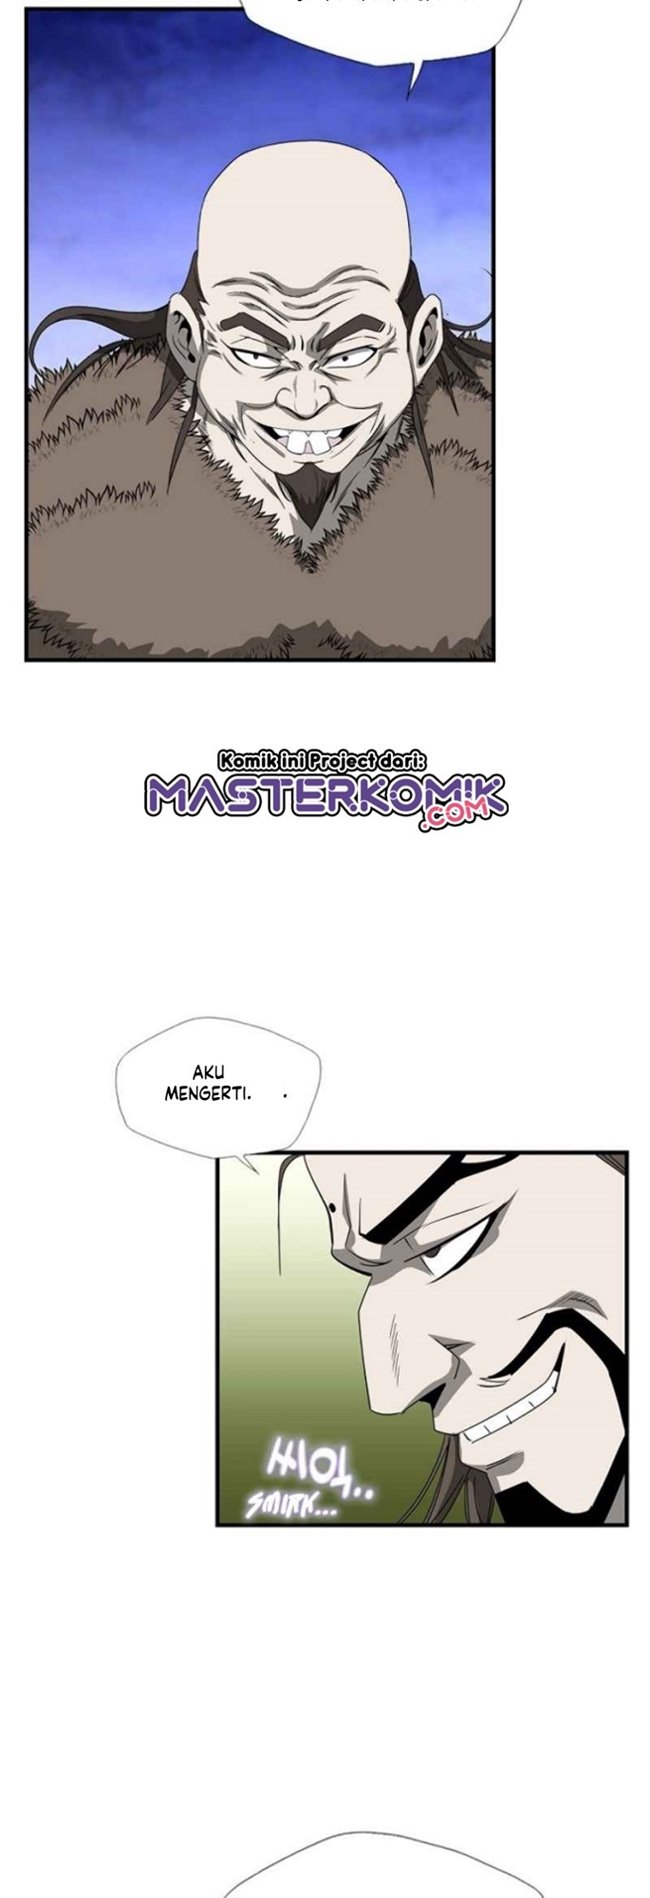 Strong Gale, Mad Dragon Chapter 43